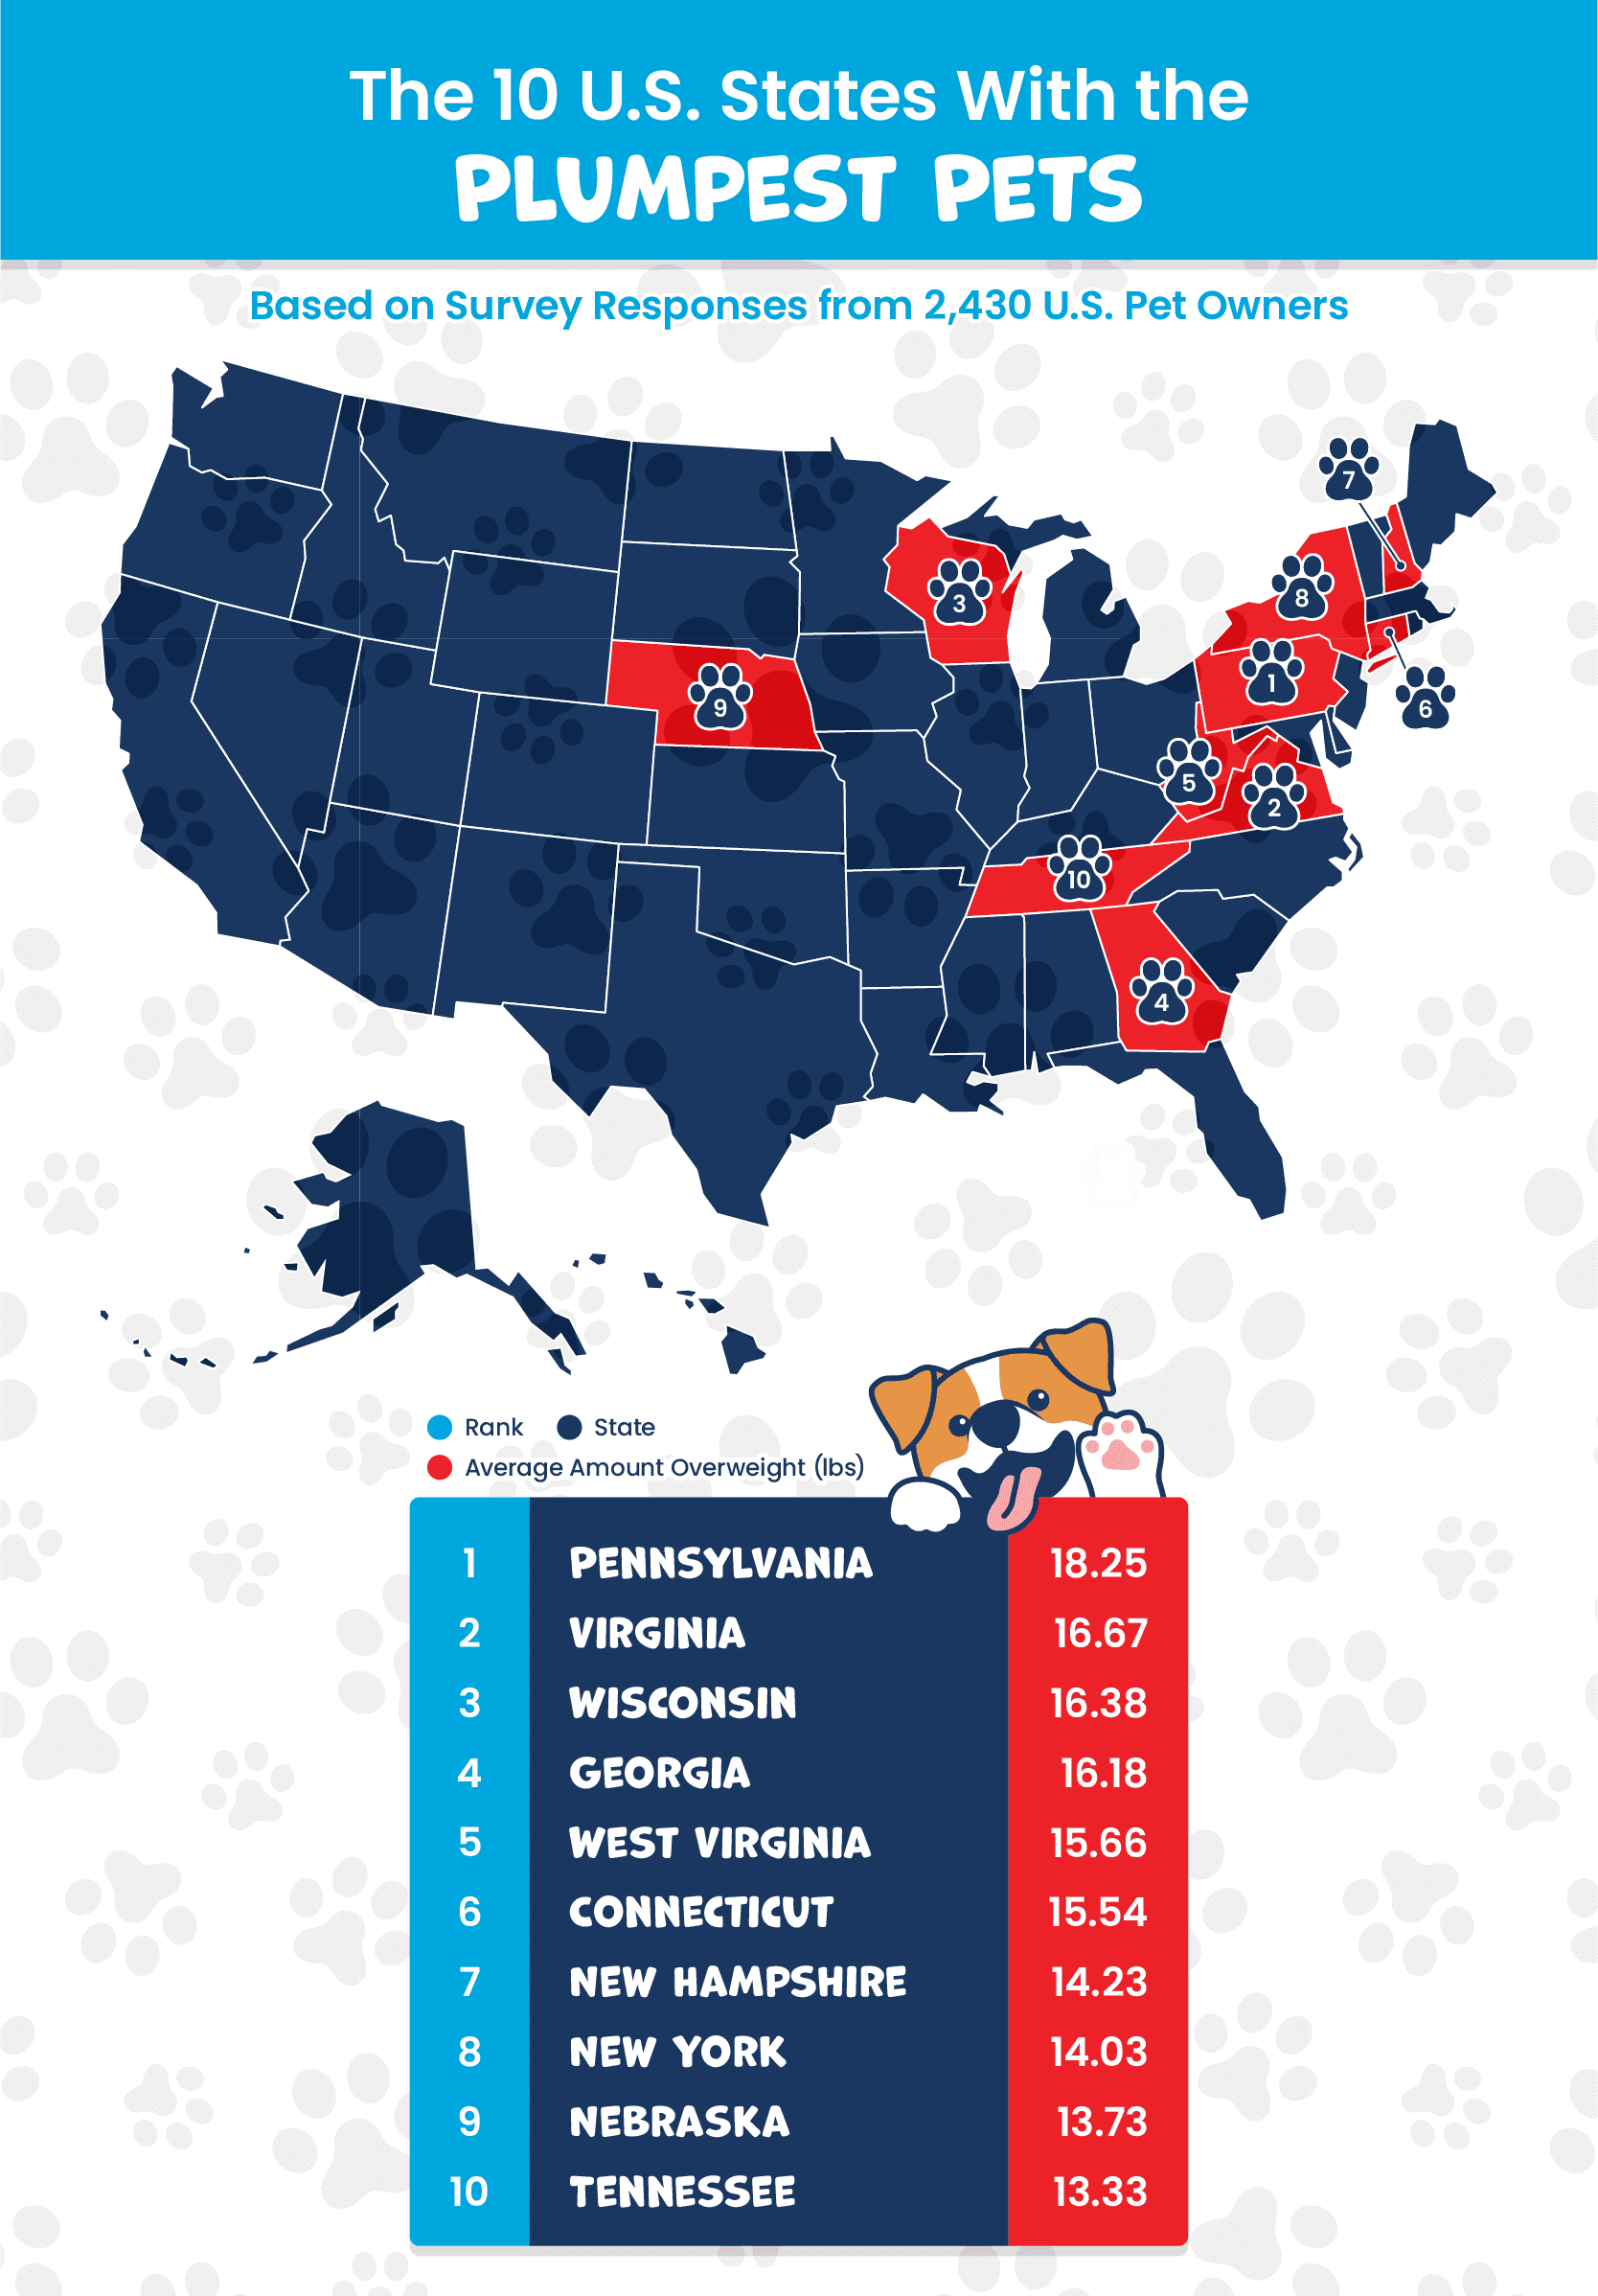 a U.S. map plotting the top 10 U.S. states with the plumpest pets